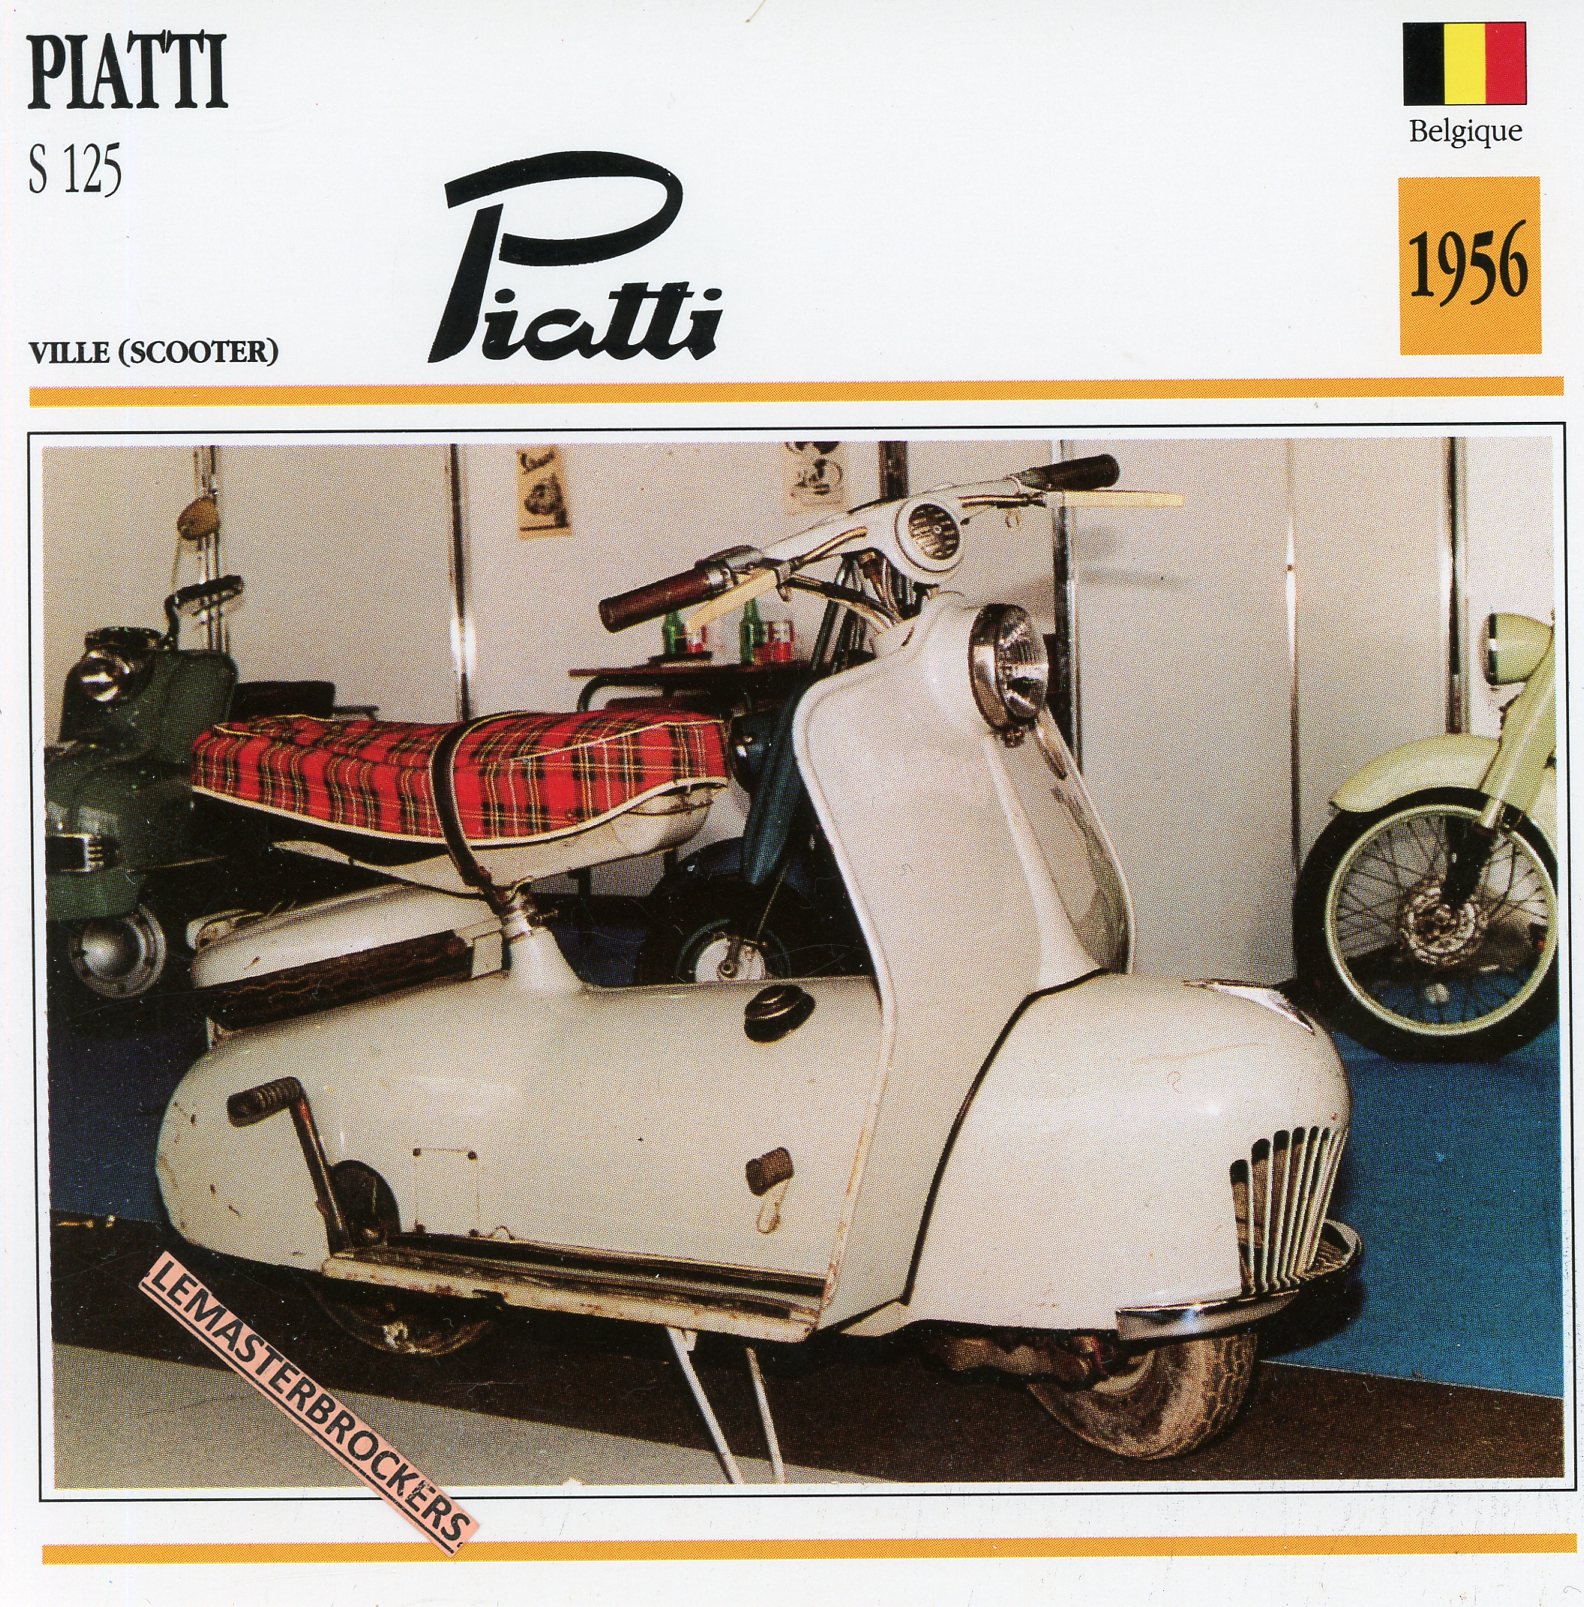 SCOOTER-PIATTI-125-S-1956-FICHE-SCOOTER-MOTORCYCLE-CARDS-ATLAS-LEMASTERBROCKERS